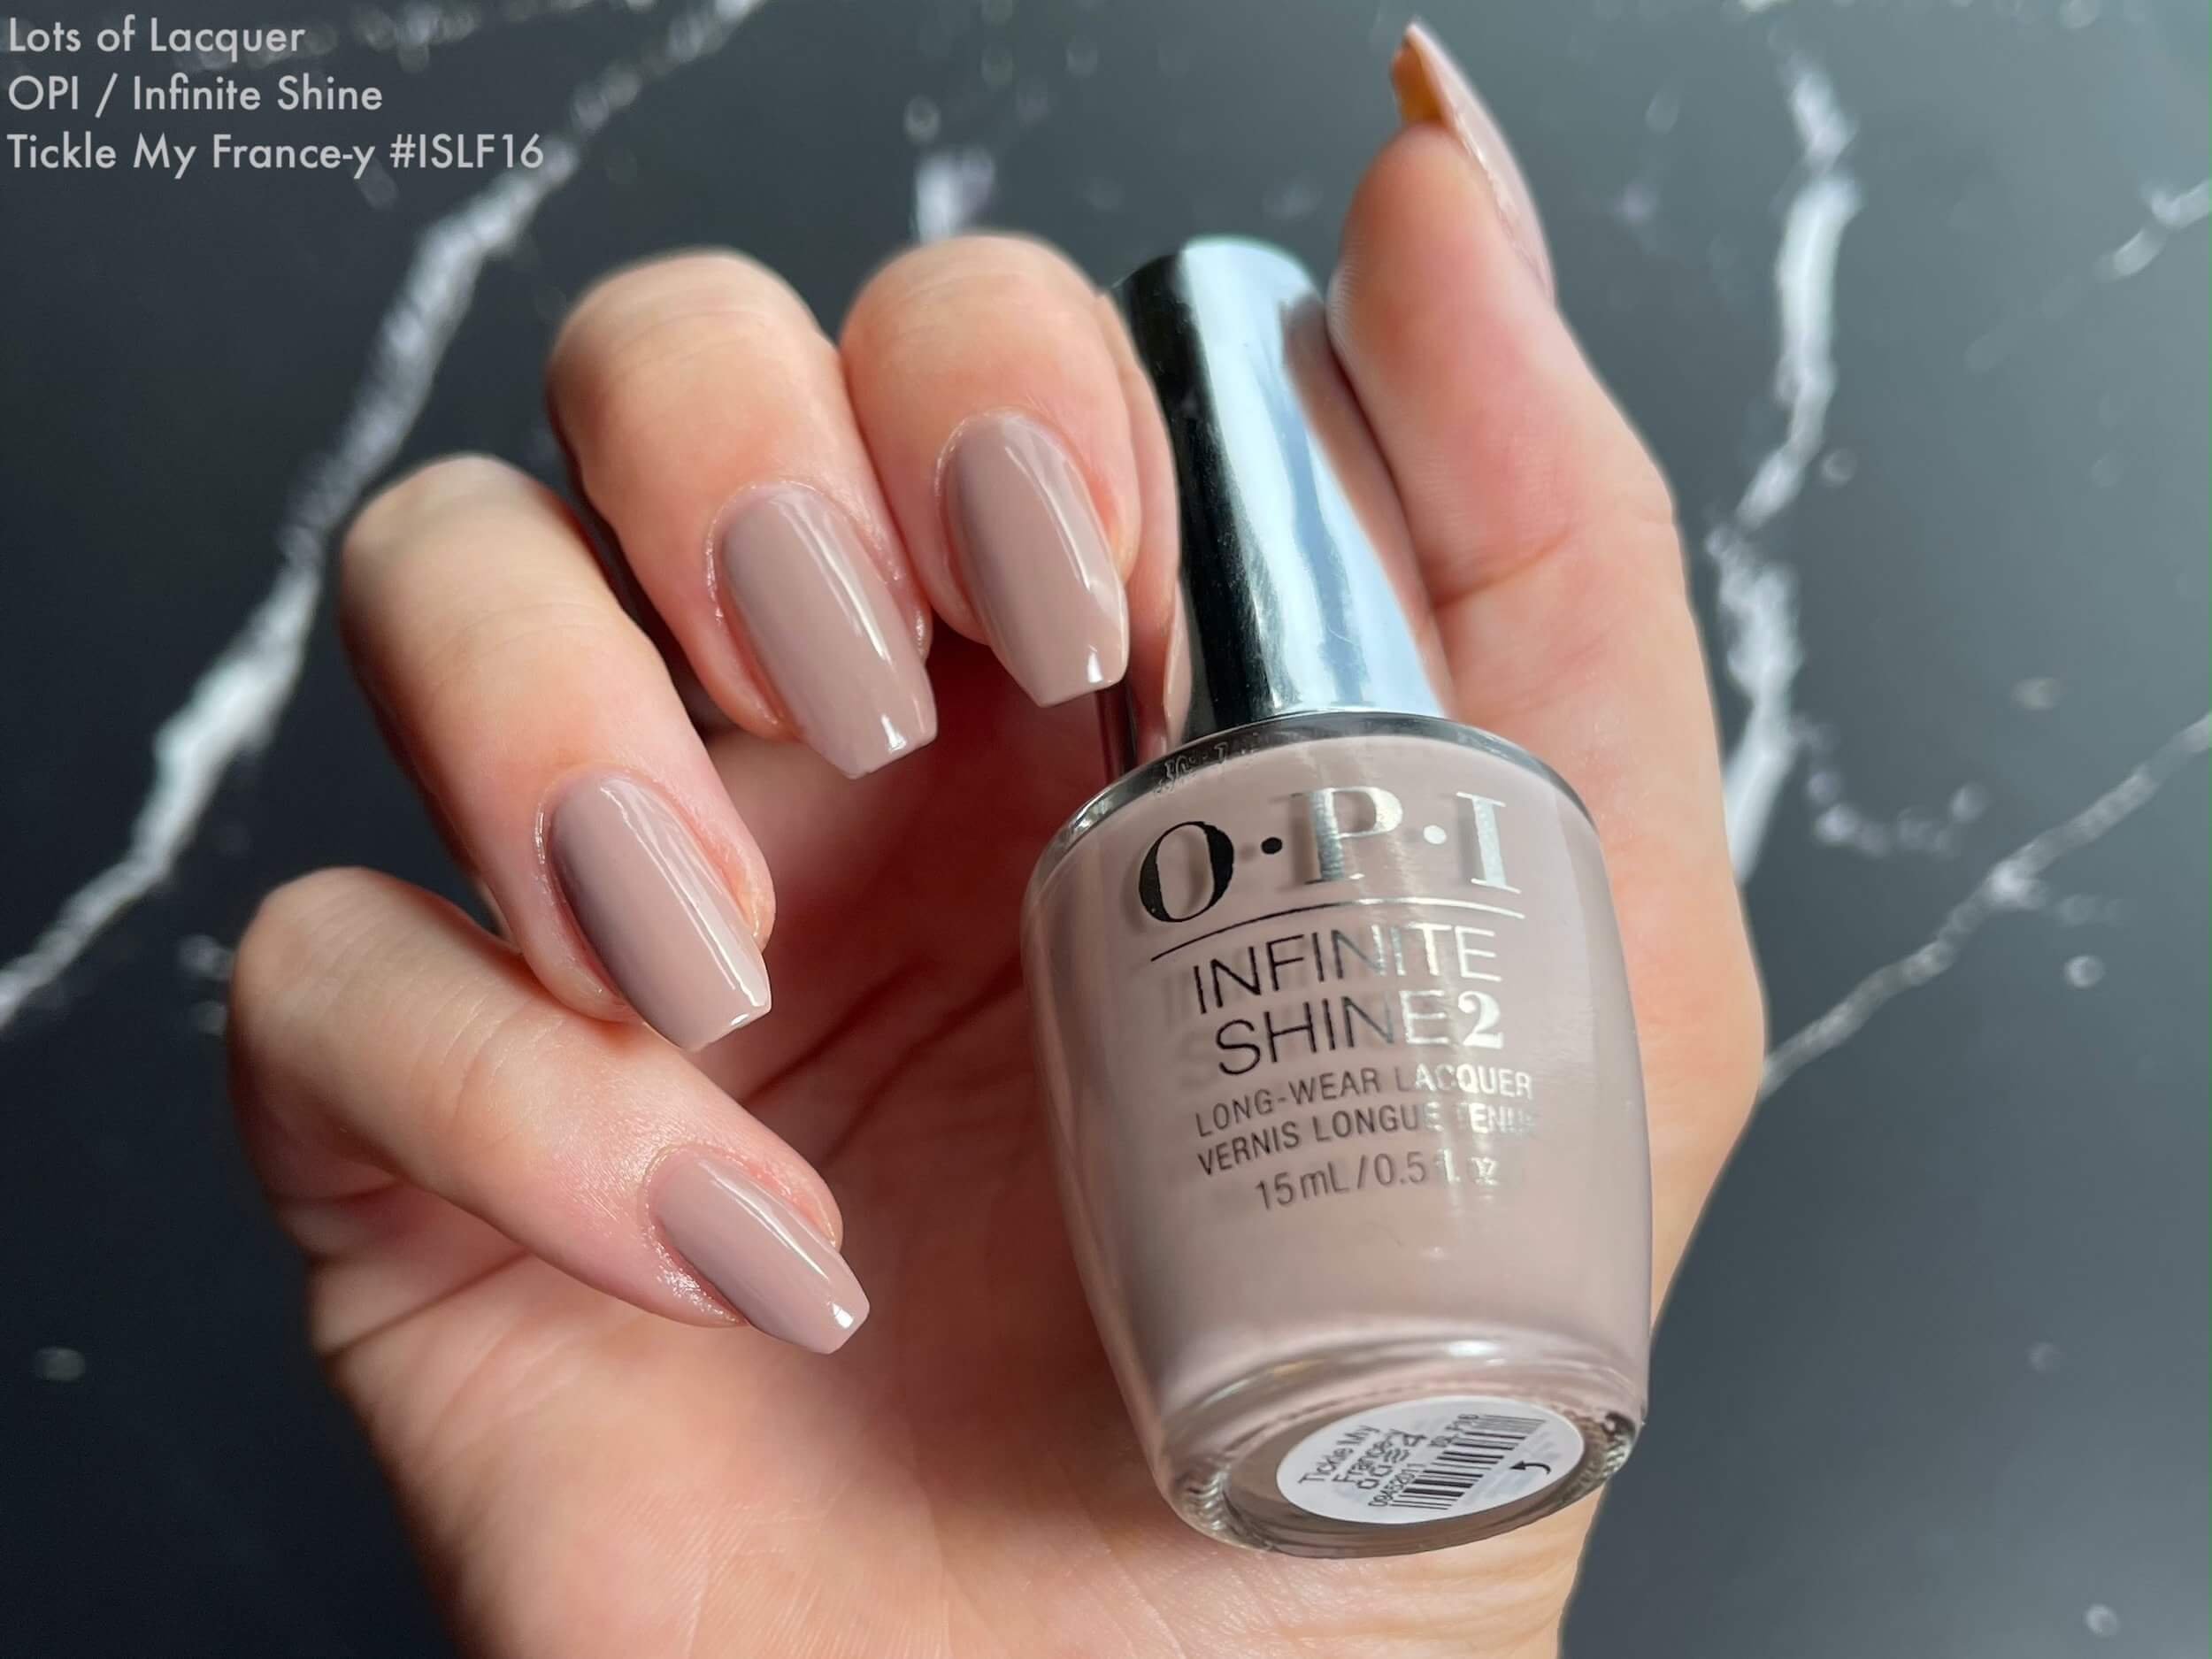 9. OPI Nail Lacquer in "Tickle My France-y" - wide 11